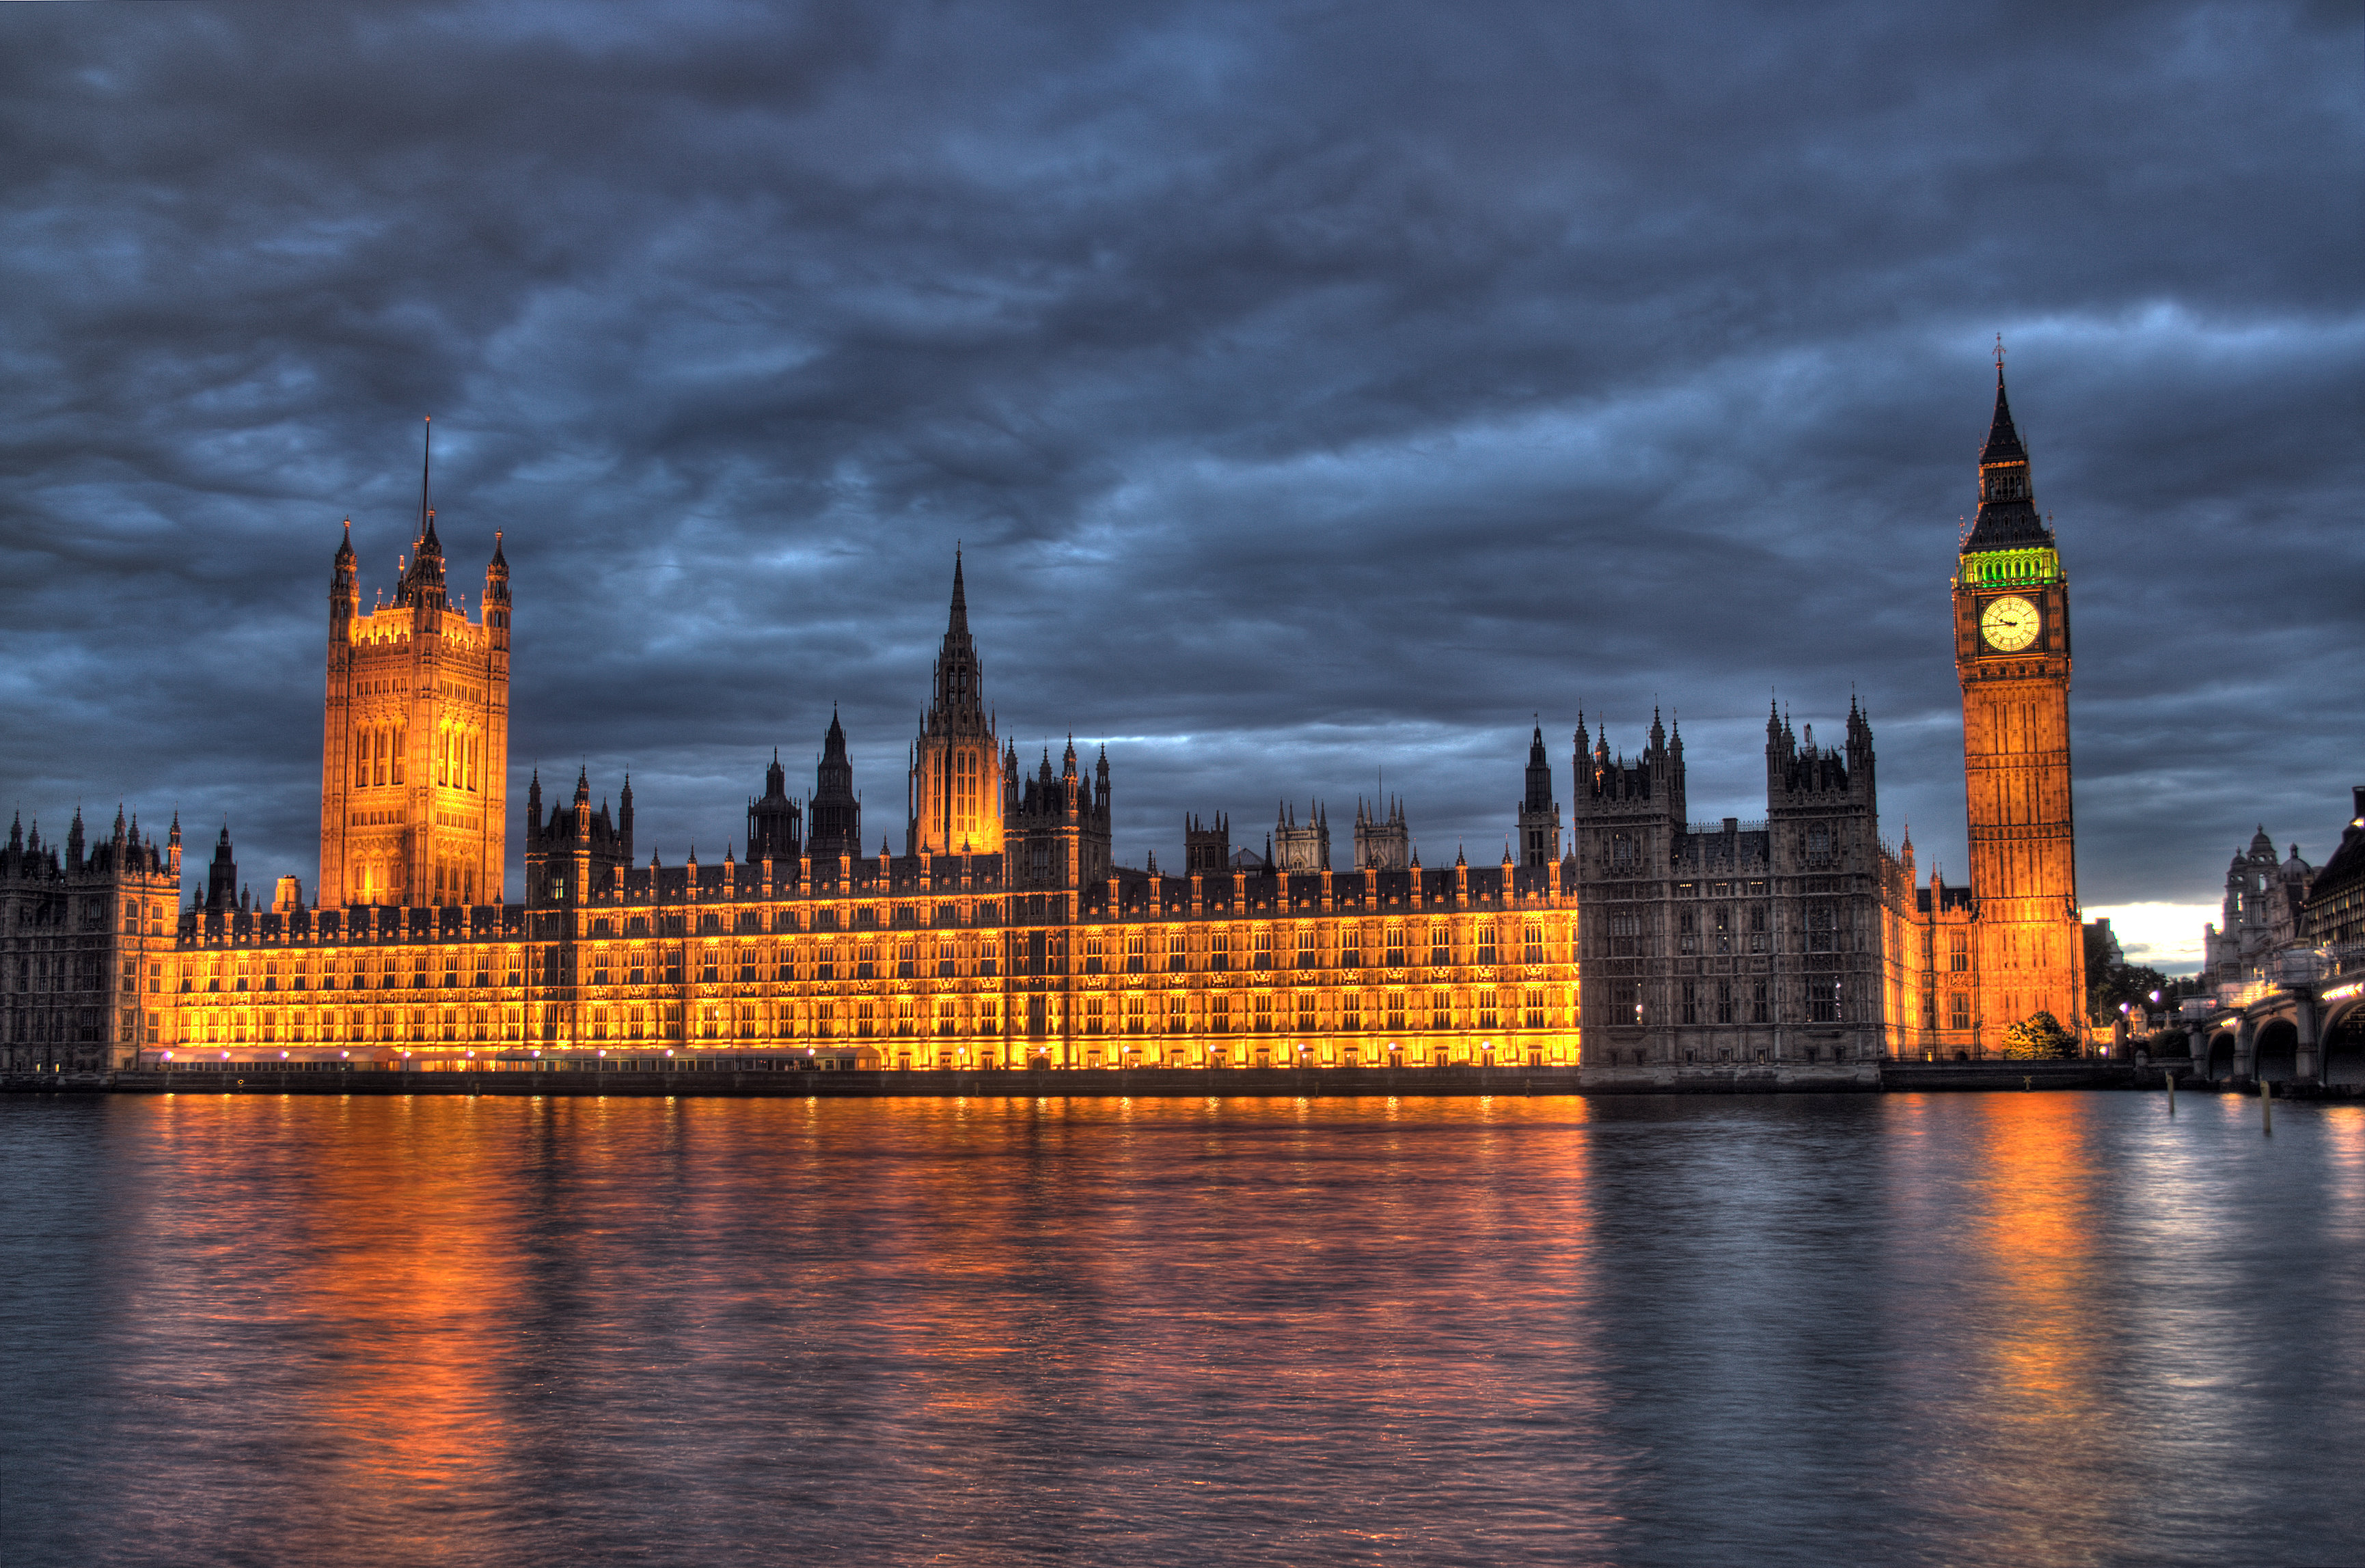 Great London Buildings The Palace of Westminster The Houses of